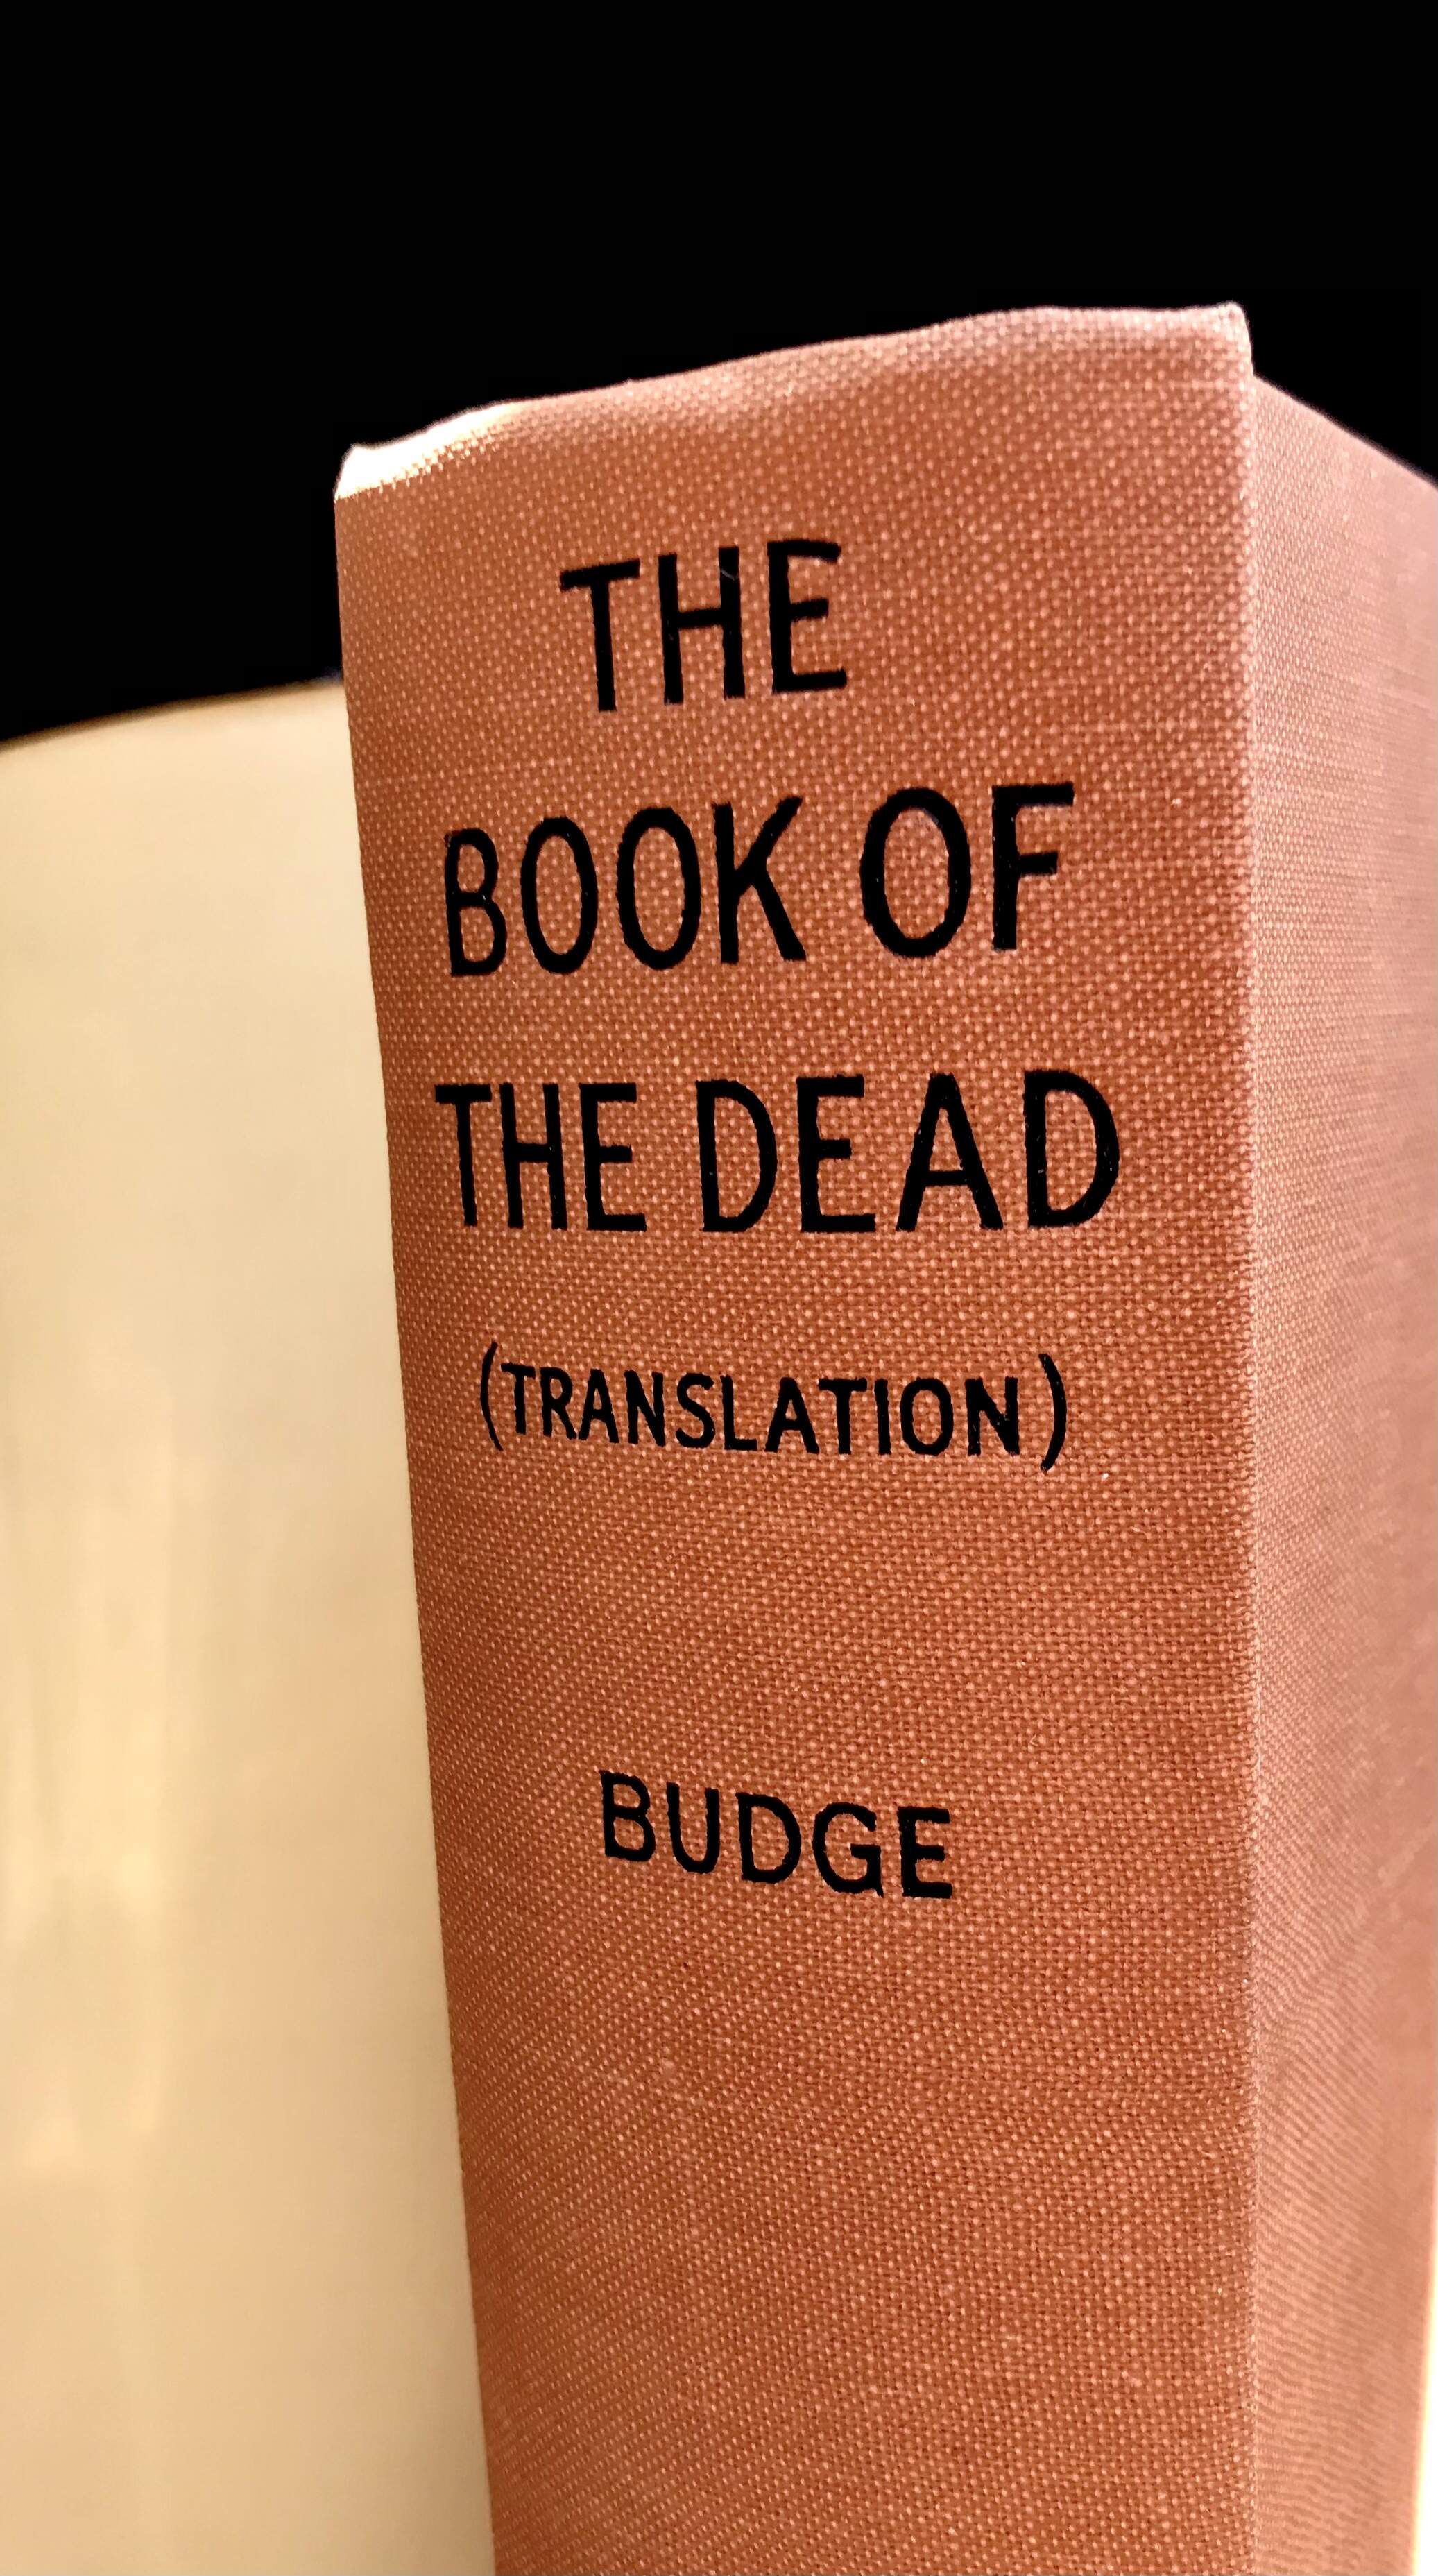 The Book Of The Dead by Wallis E. A. Budge